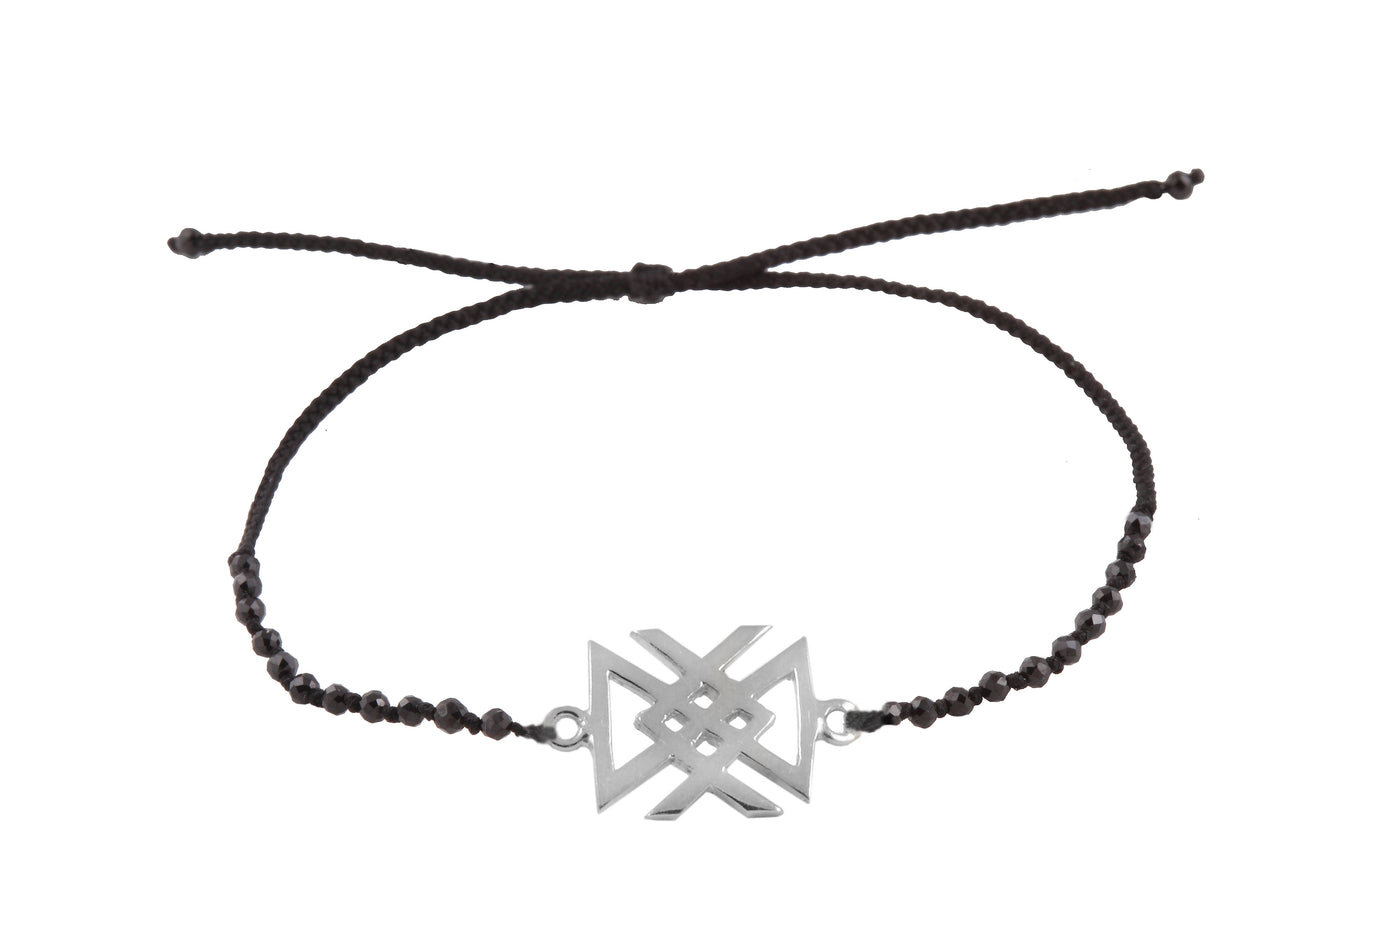 Bind rune "Health amulet" bracelet with beads. Silver